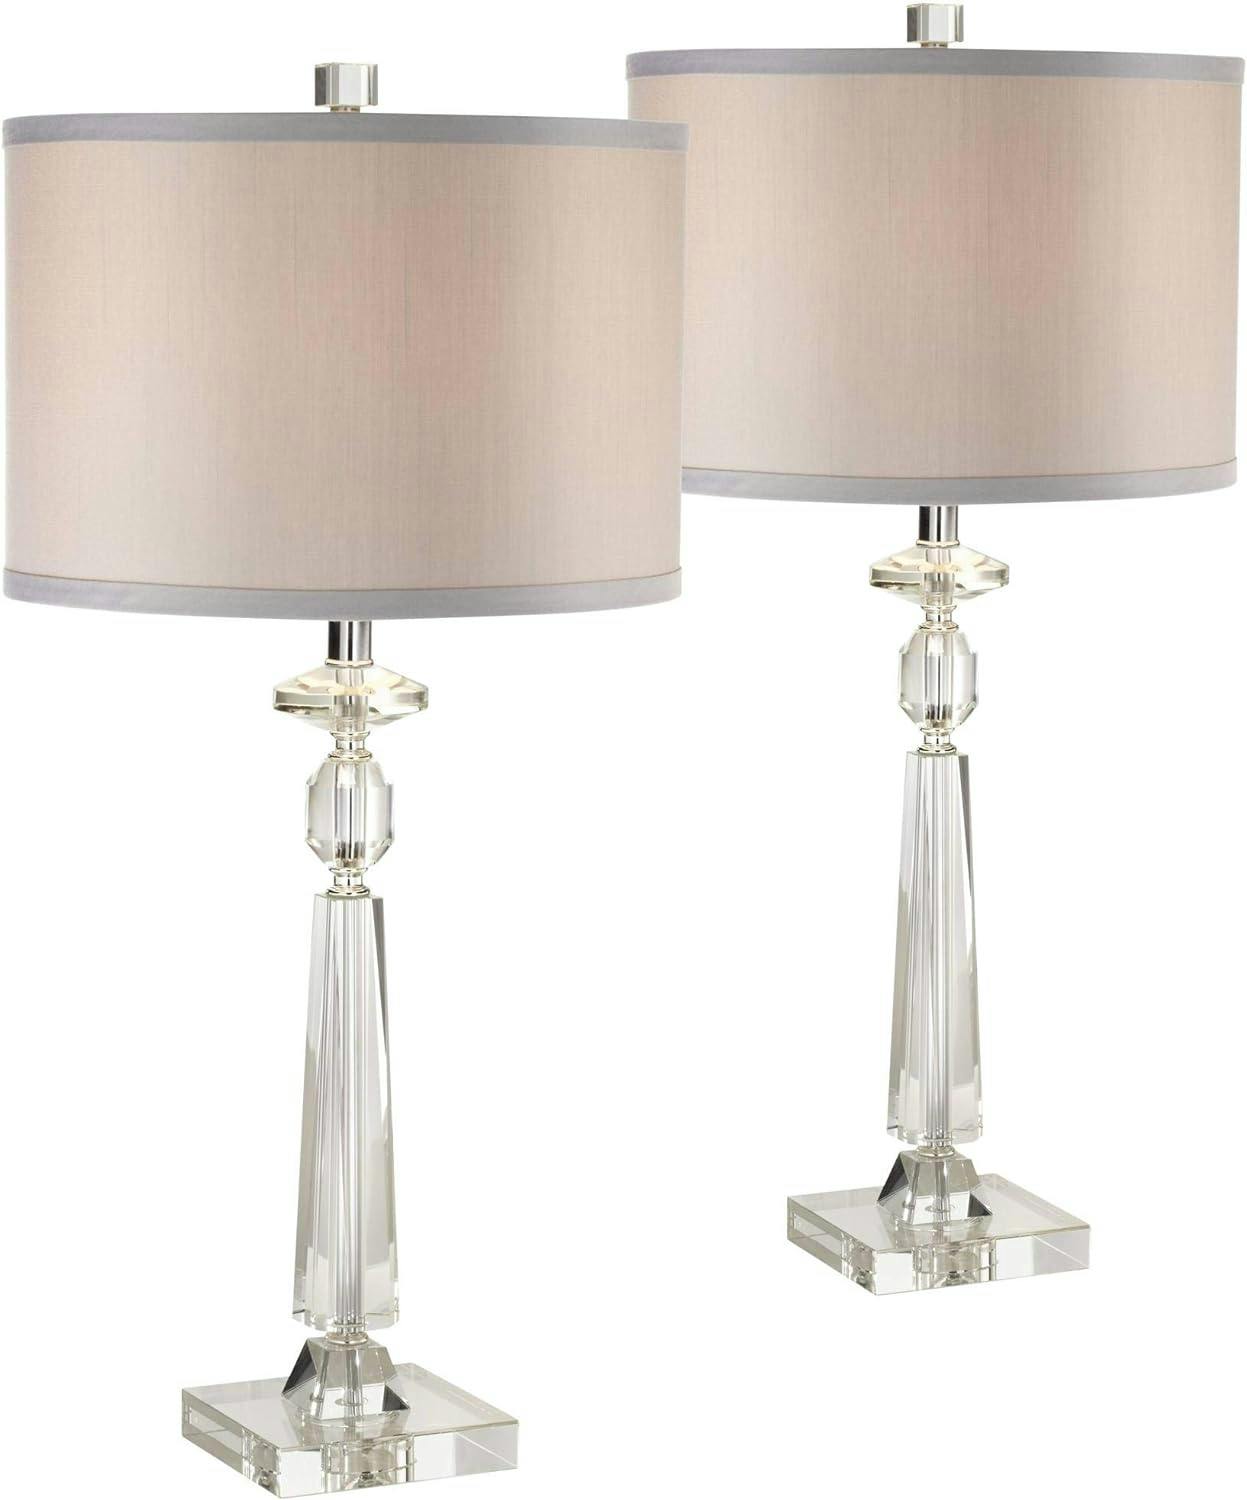 Geometric Crystal Column Table Lamps with Gray Drum Shade - Set of 2